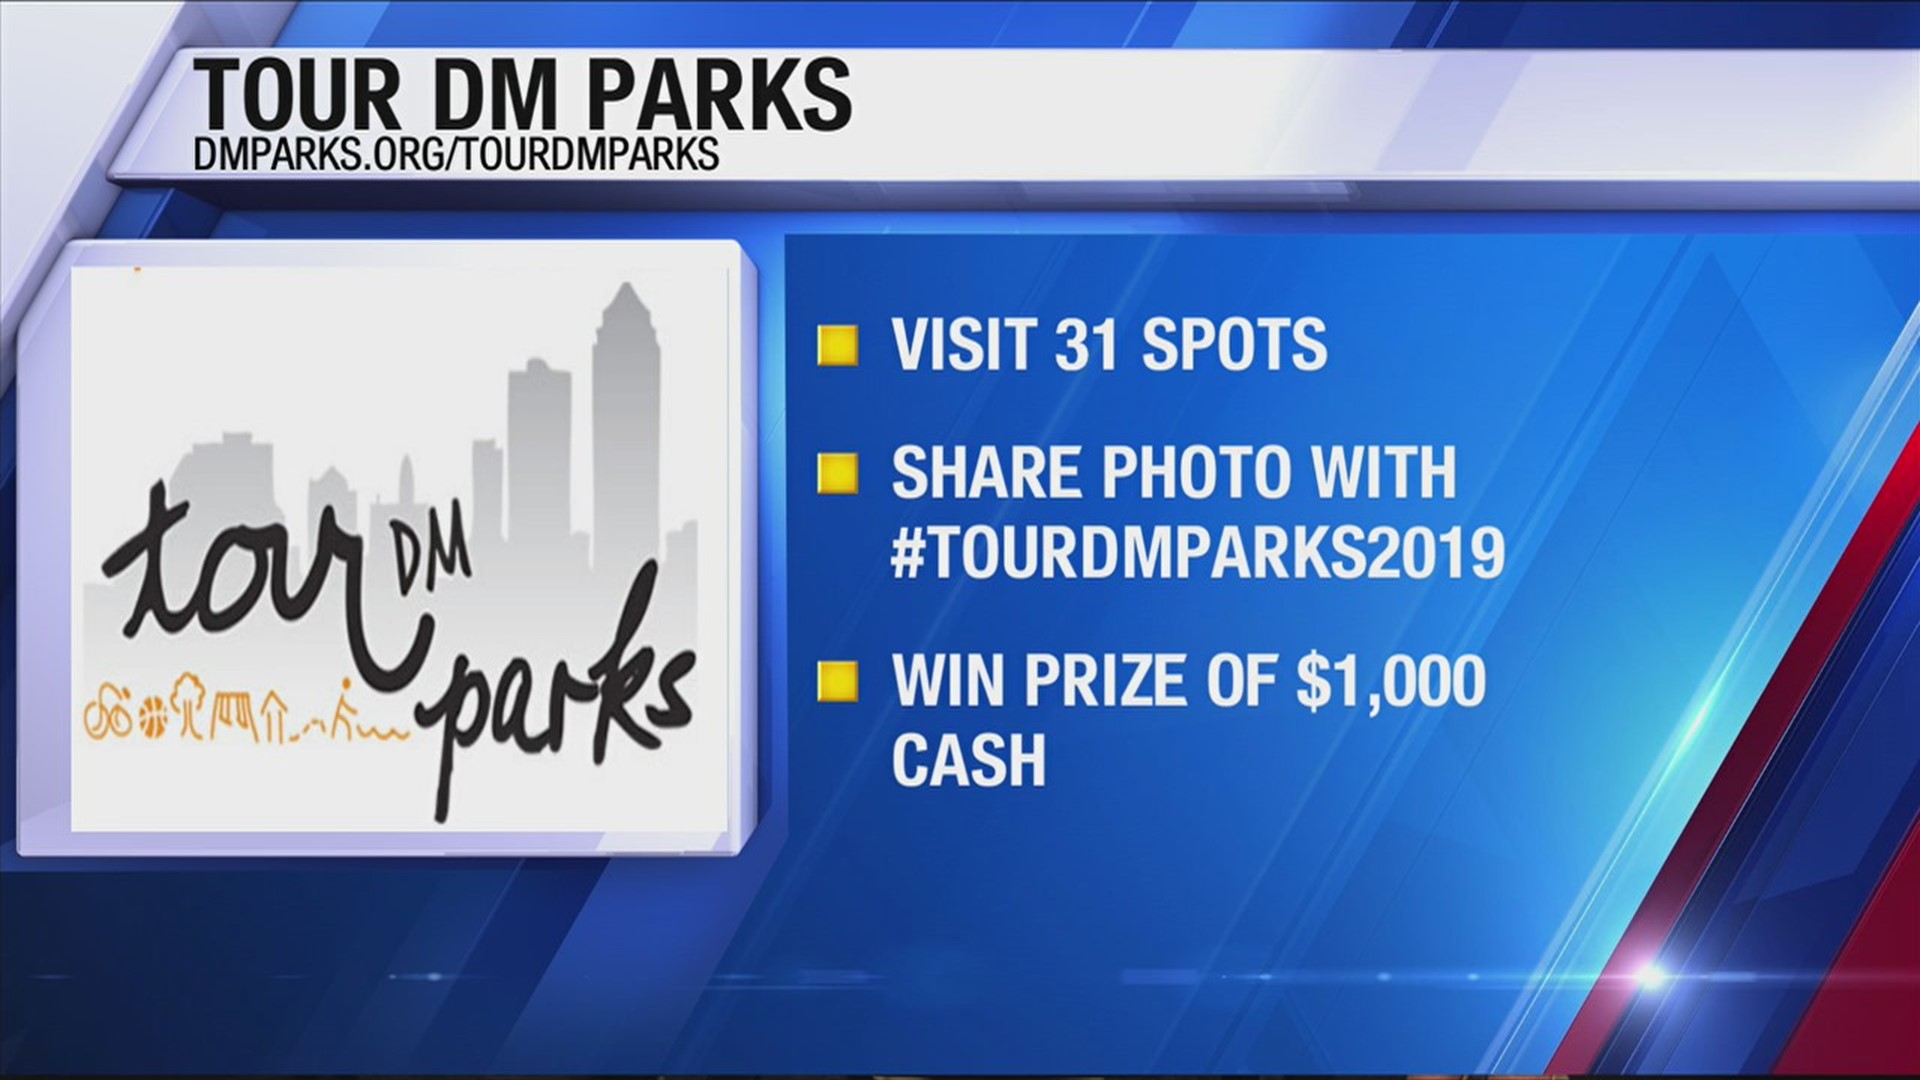 July is National Parks and Recreation month and the Des Moines Parks and Recreation wants you to explore all they have to offer as Tour DM Parks returns.